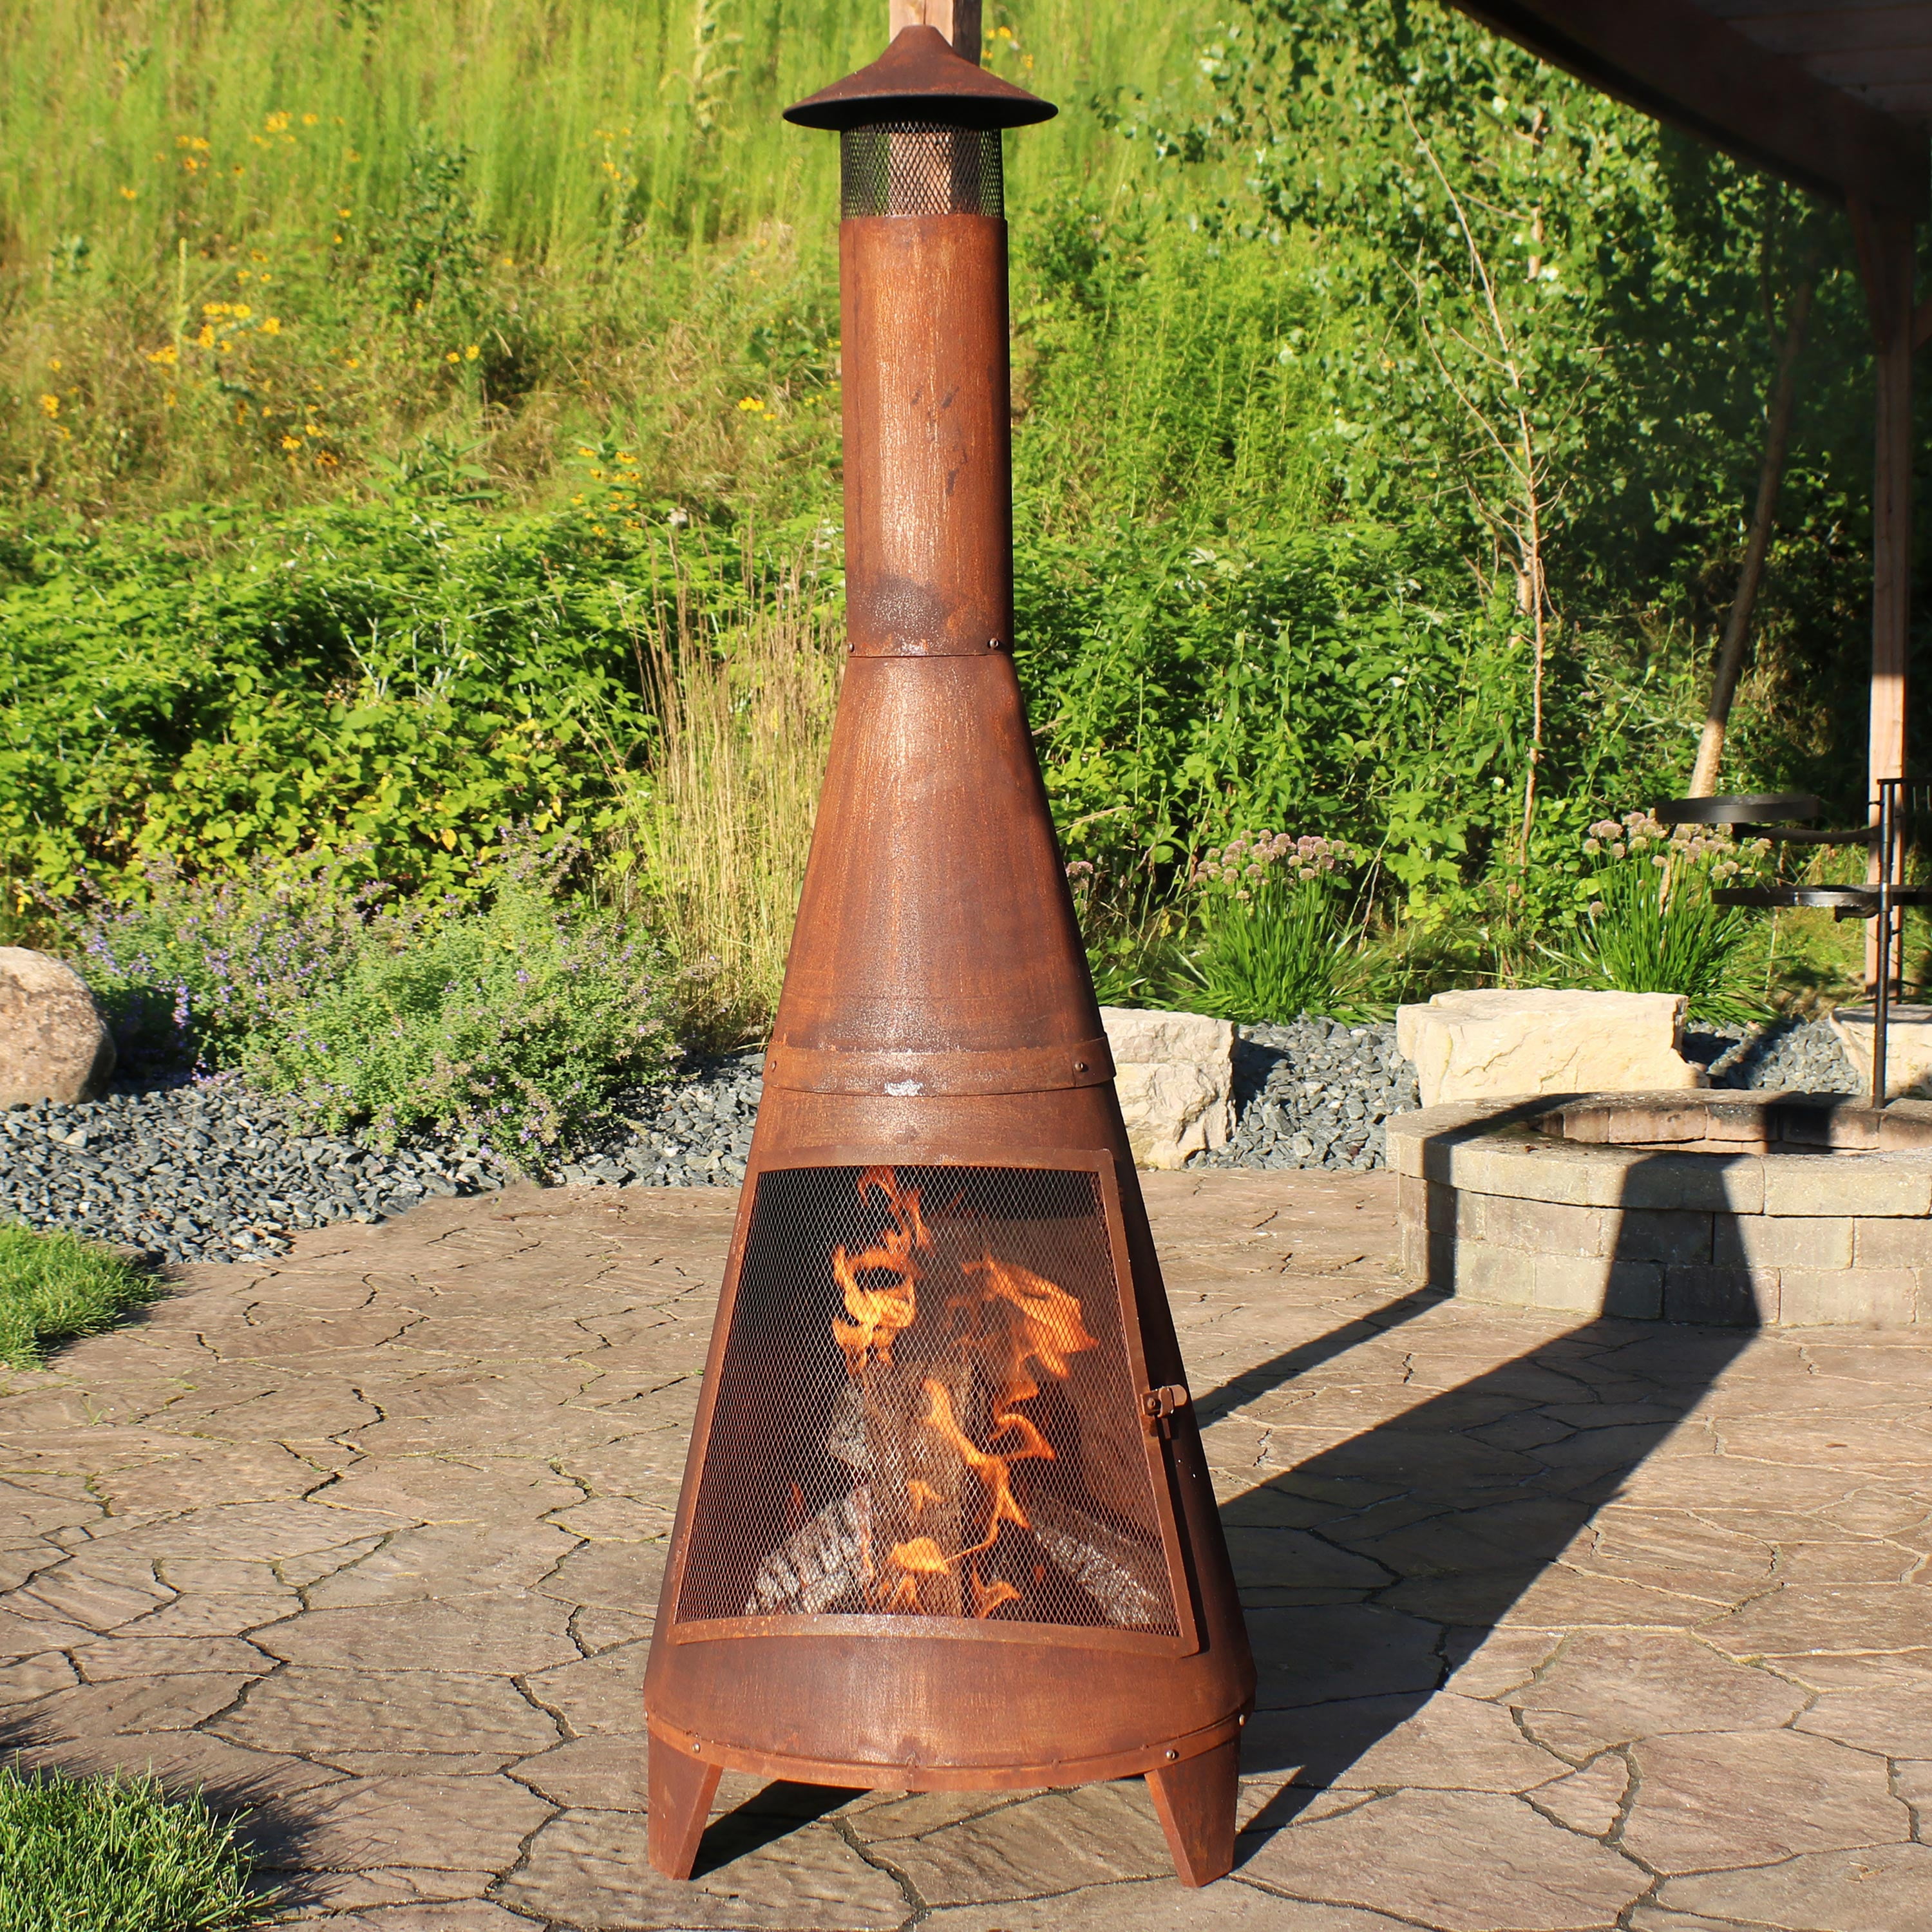 Sunnydaze Rustic Chiminea Outdoor, Outdoor Free Standing Fire Pits